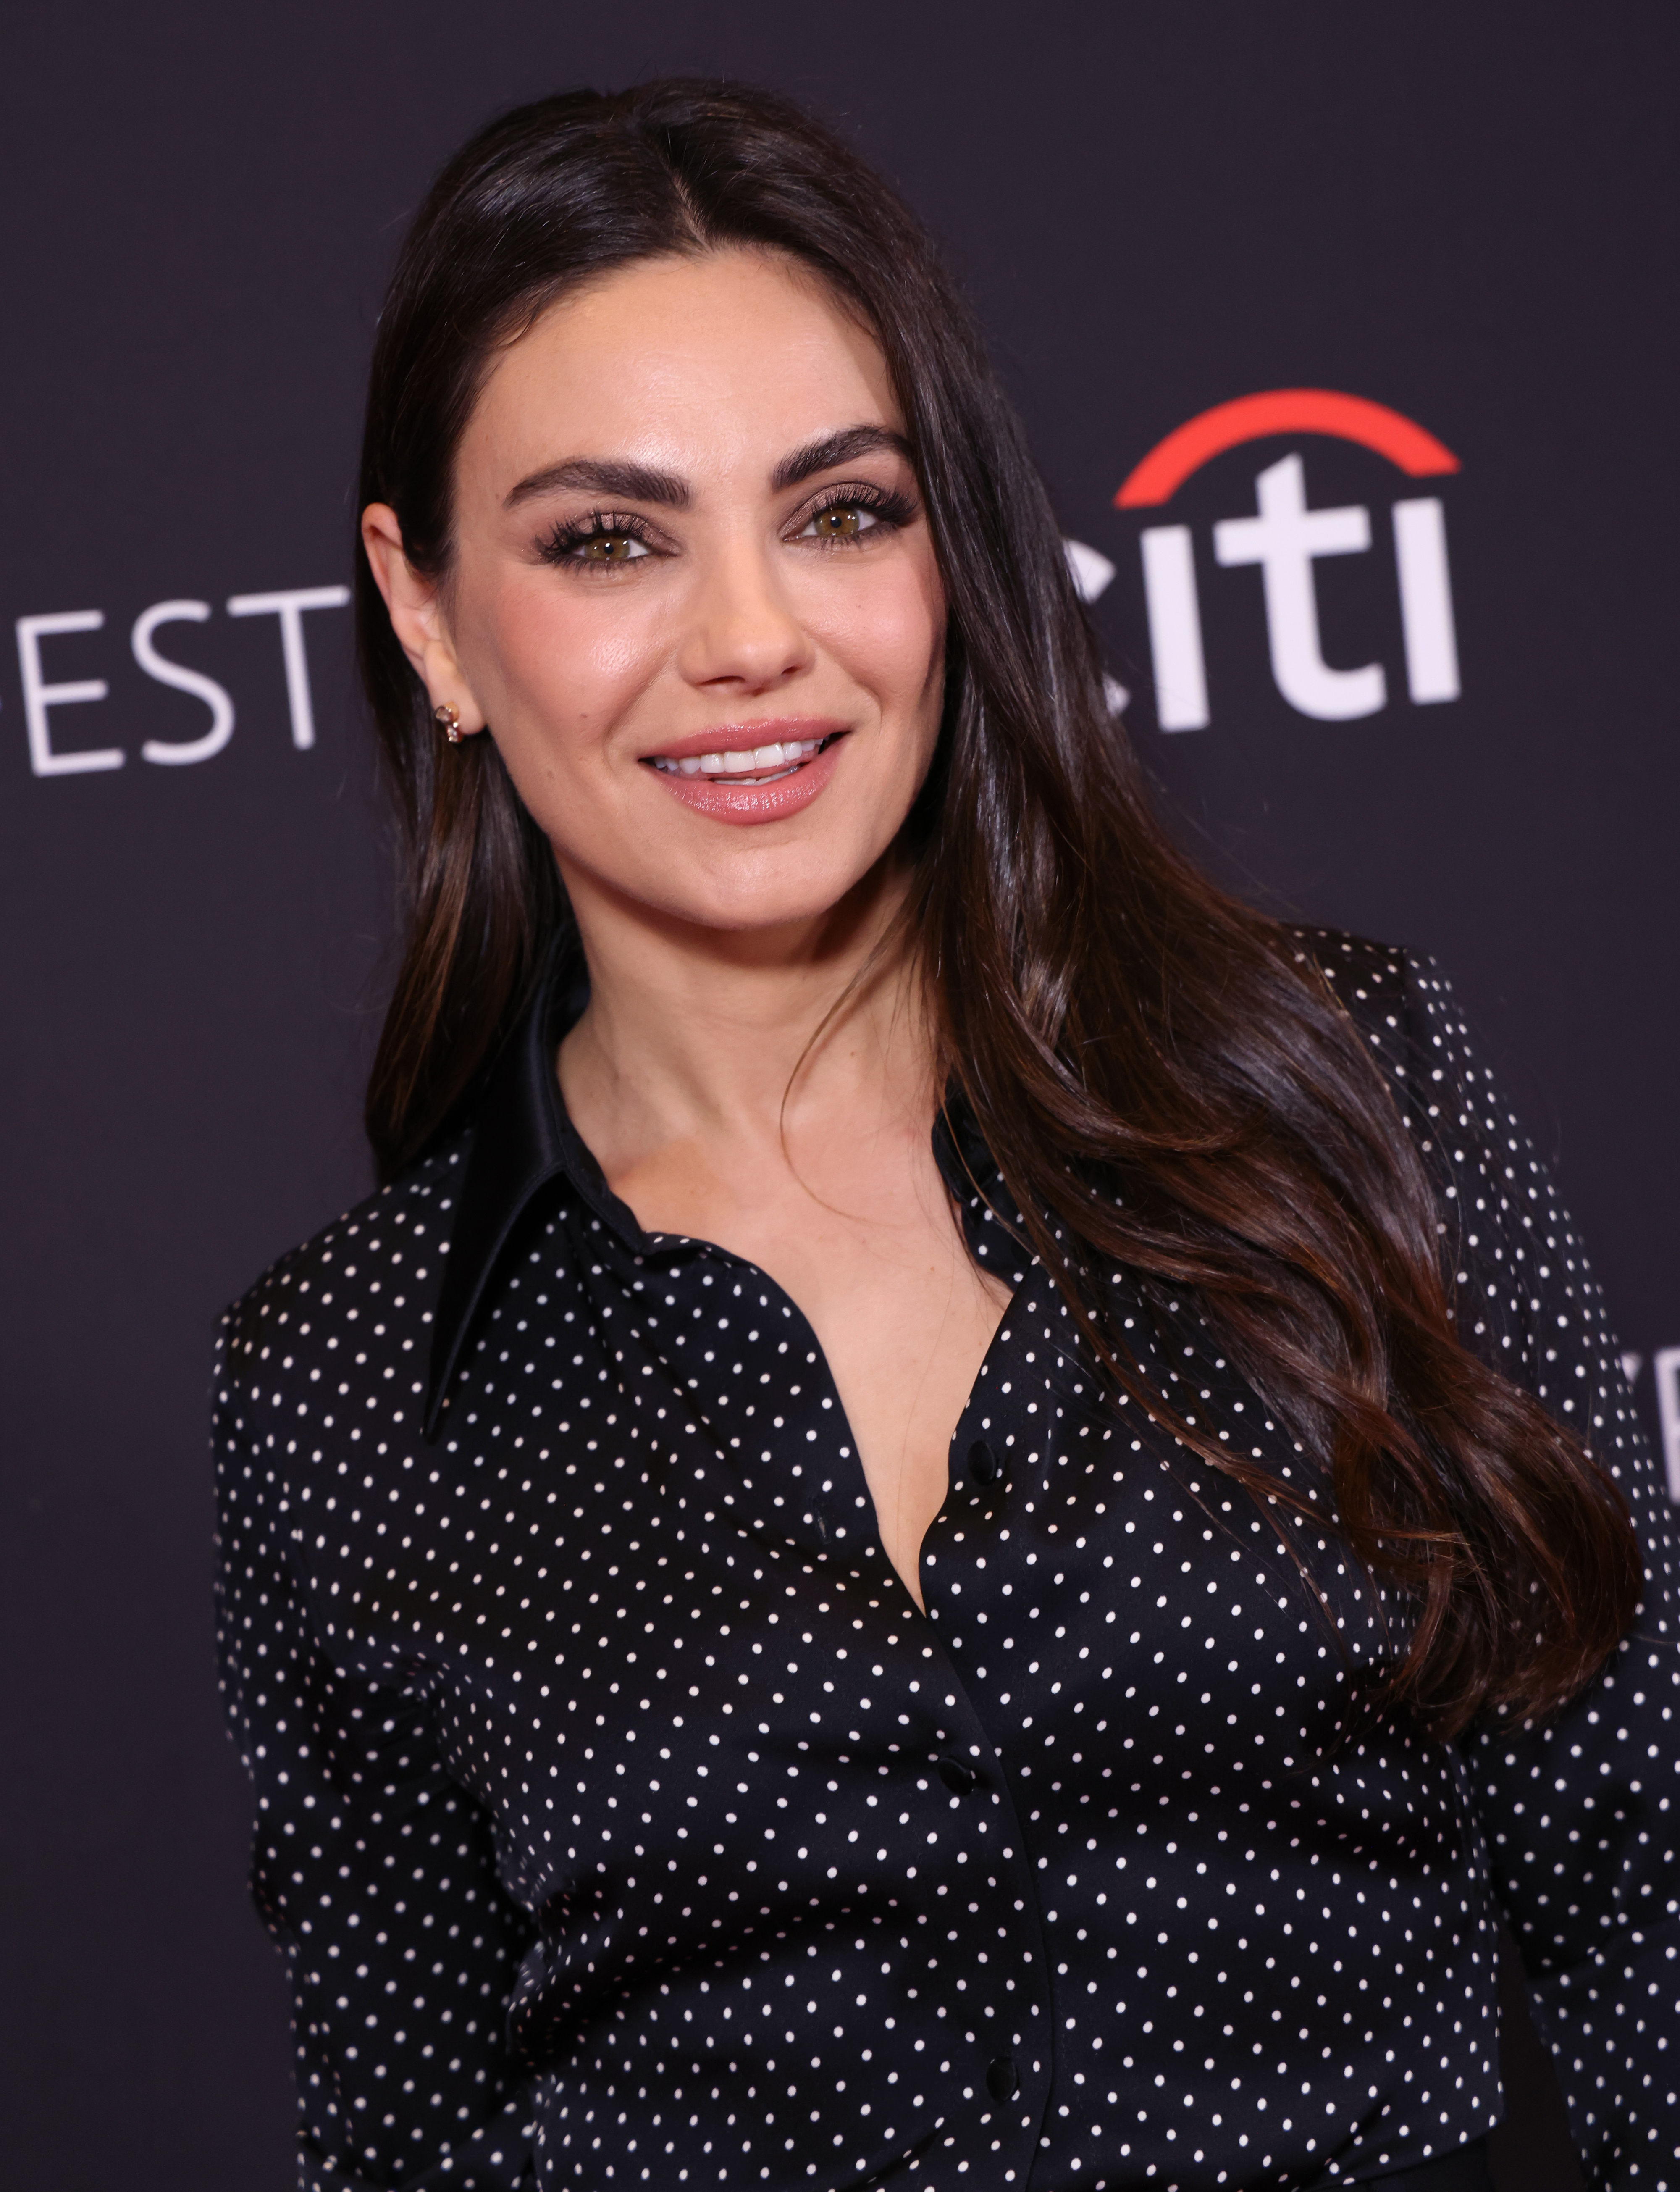 Mila Kunis poses with a smile and is wearing a polka-dotted top at a promotional event